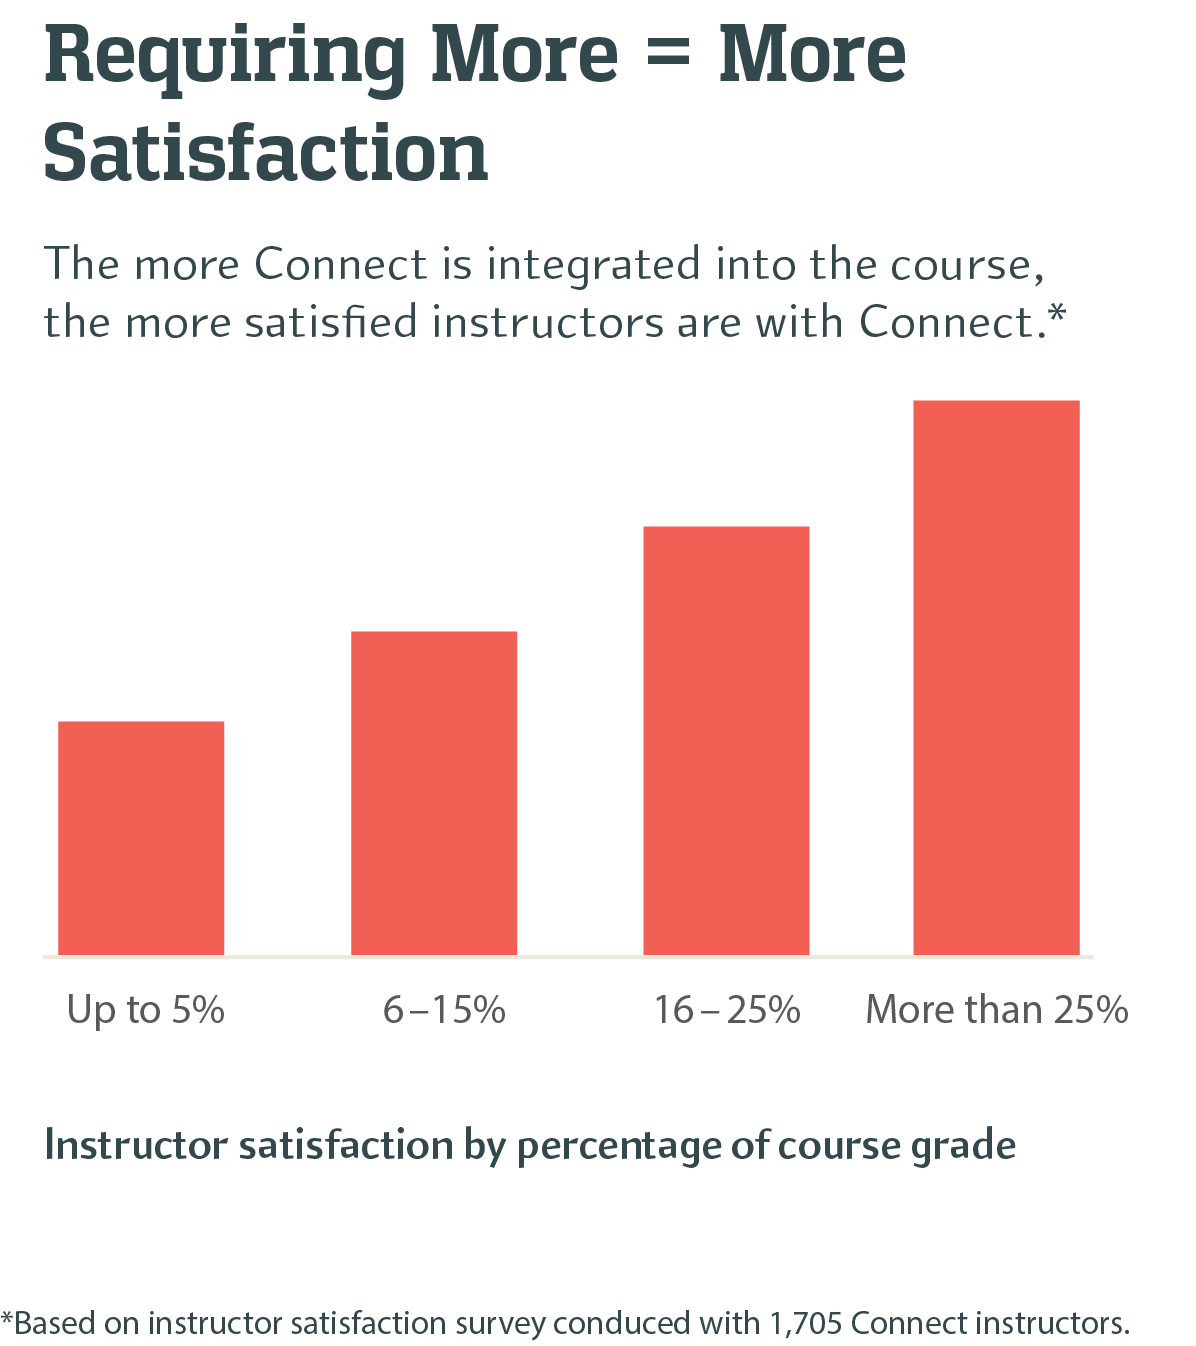 More Connect = More Satisfaction